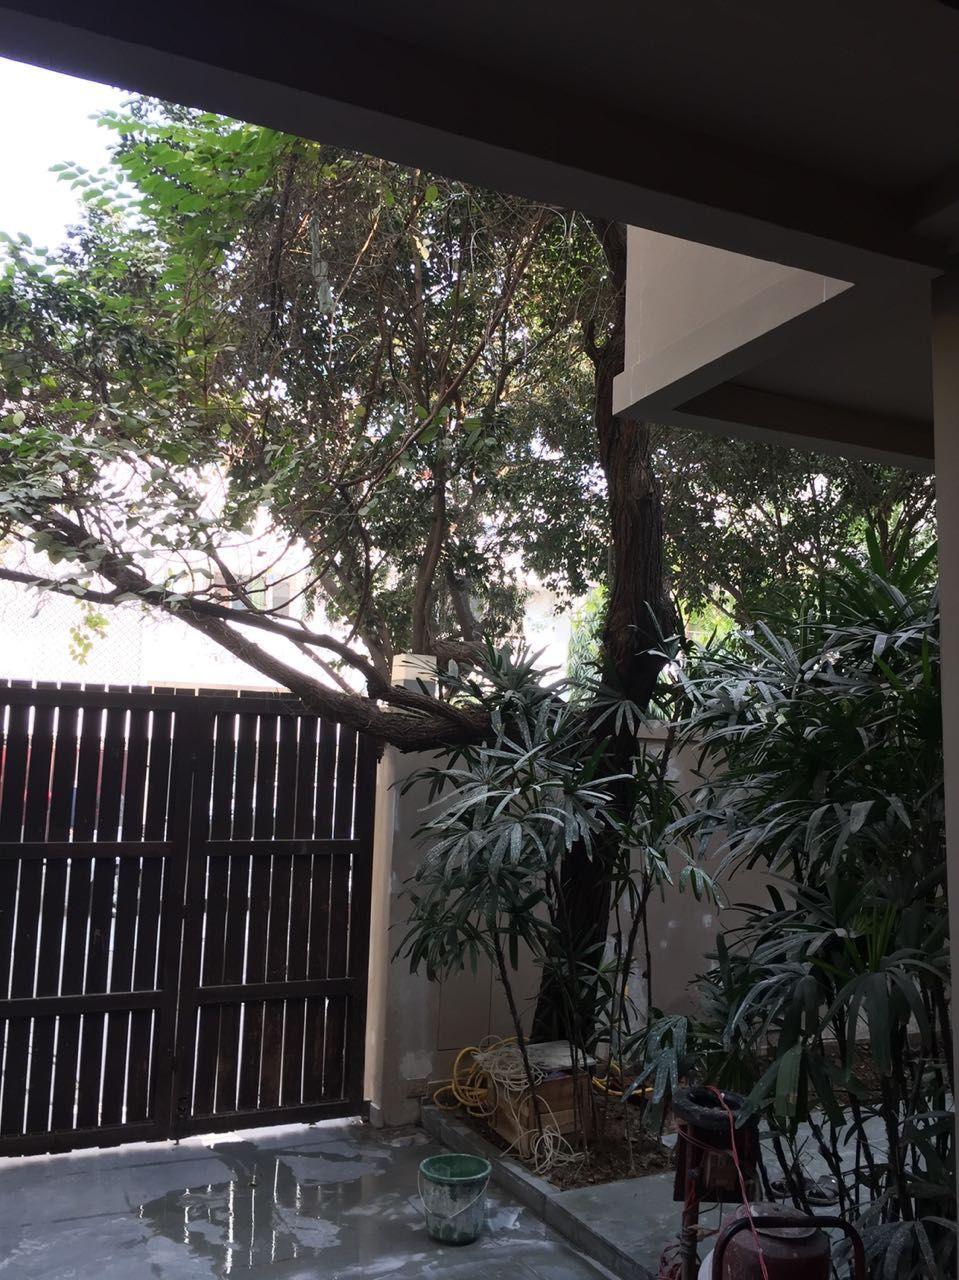 5 Bedrooms 5 Baths Independent House/Villa for Sale in, Defence Colony, , Delhi South